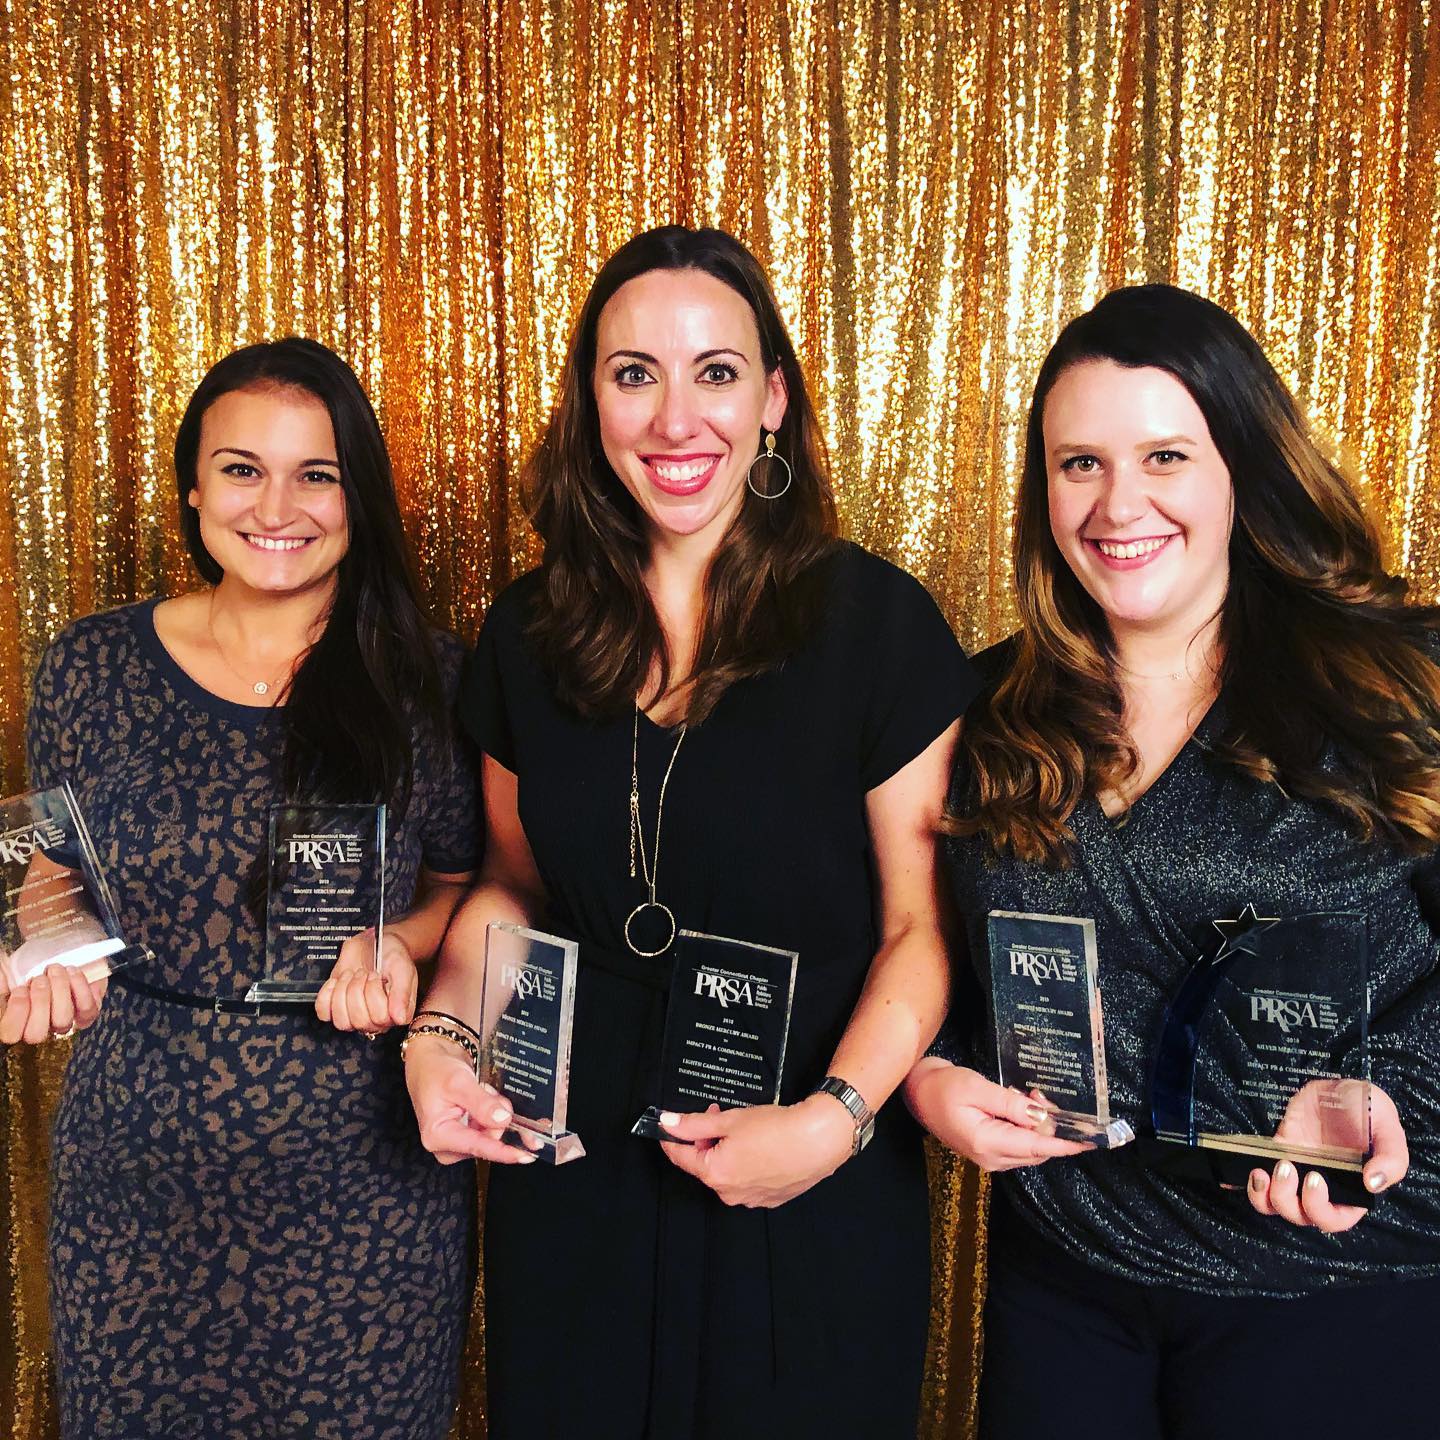 Impact PR & Communications recognized as tops in media relations at 2020 PRSA Mercury Awards